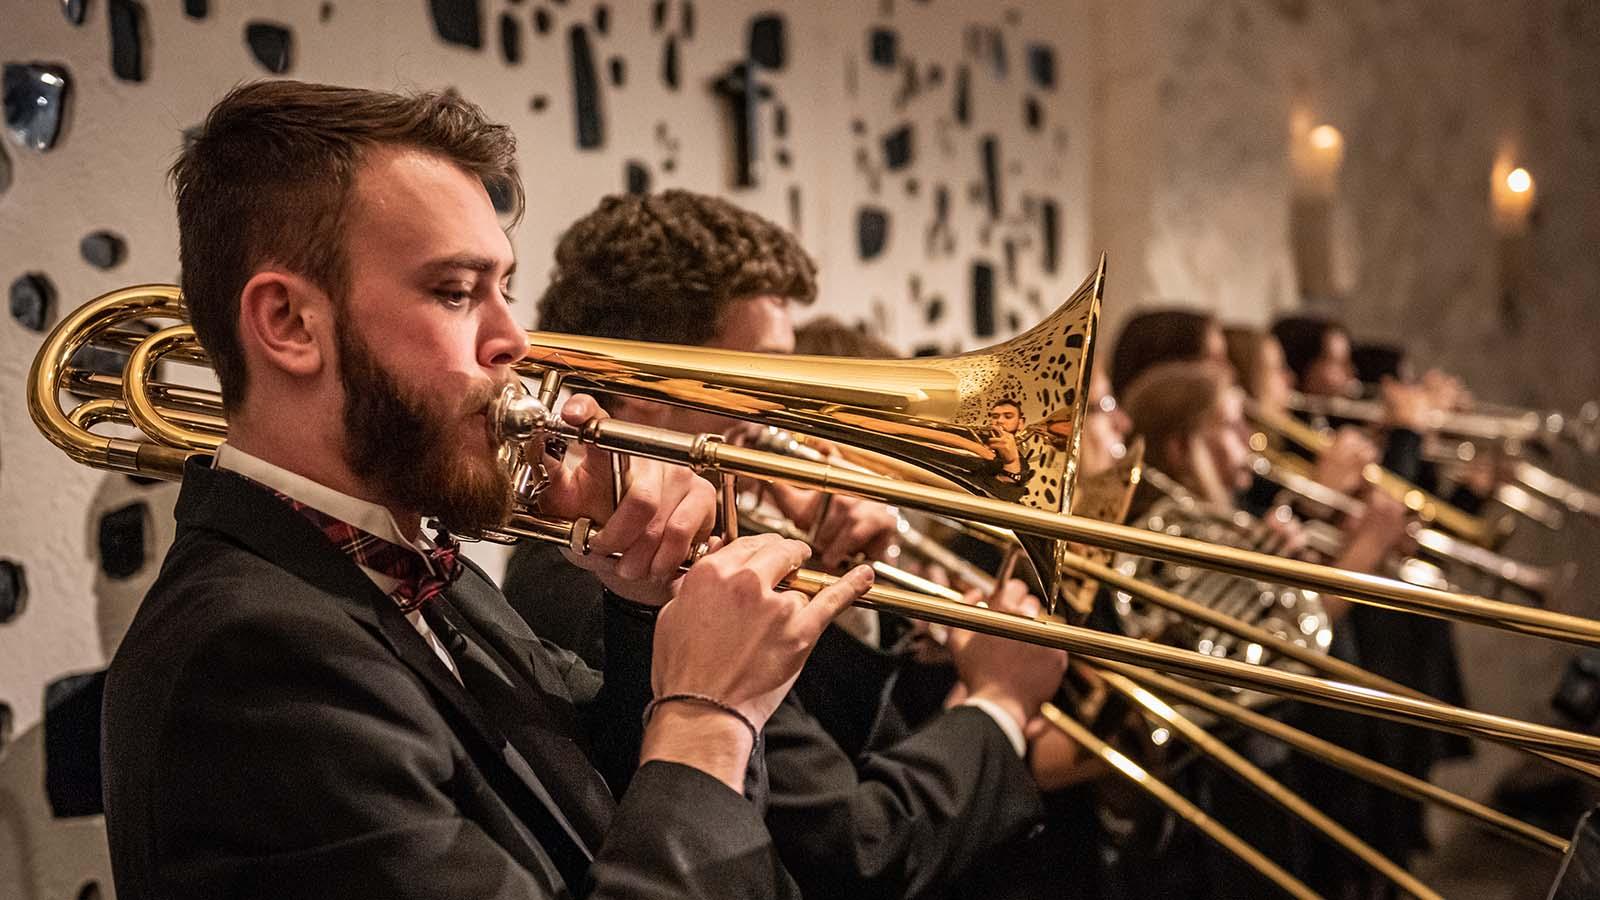 Trombone players performing as part of brass ensemble.